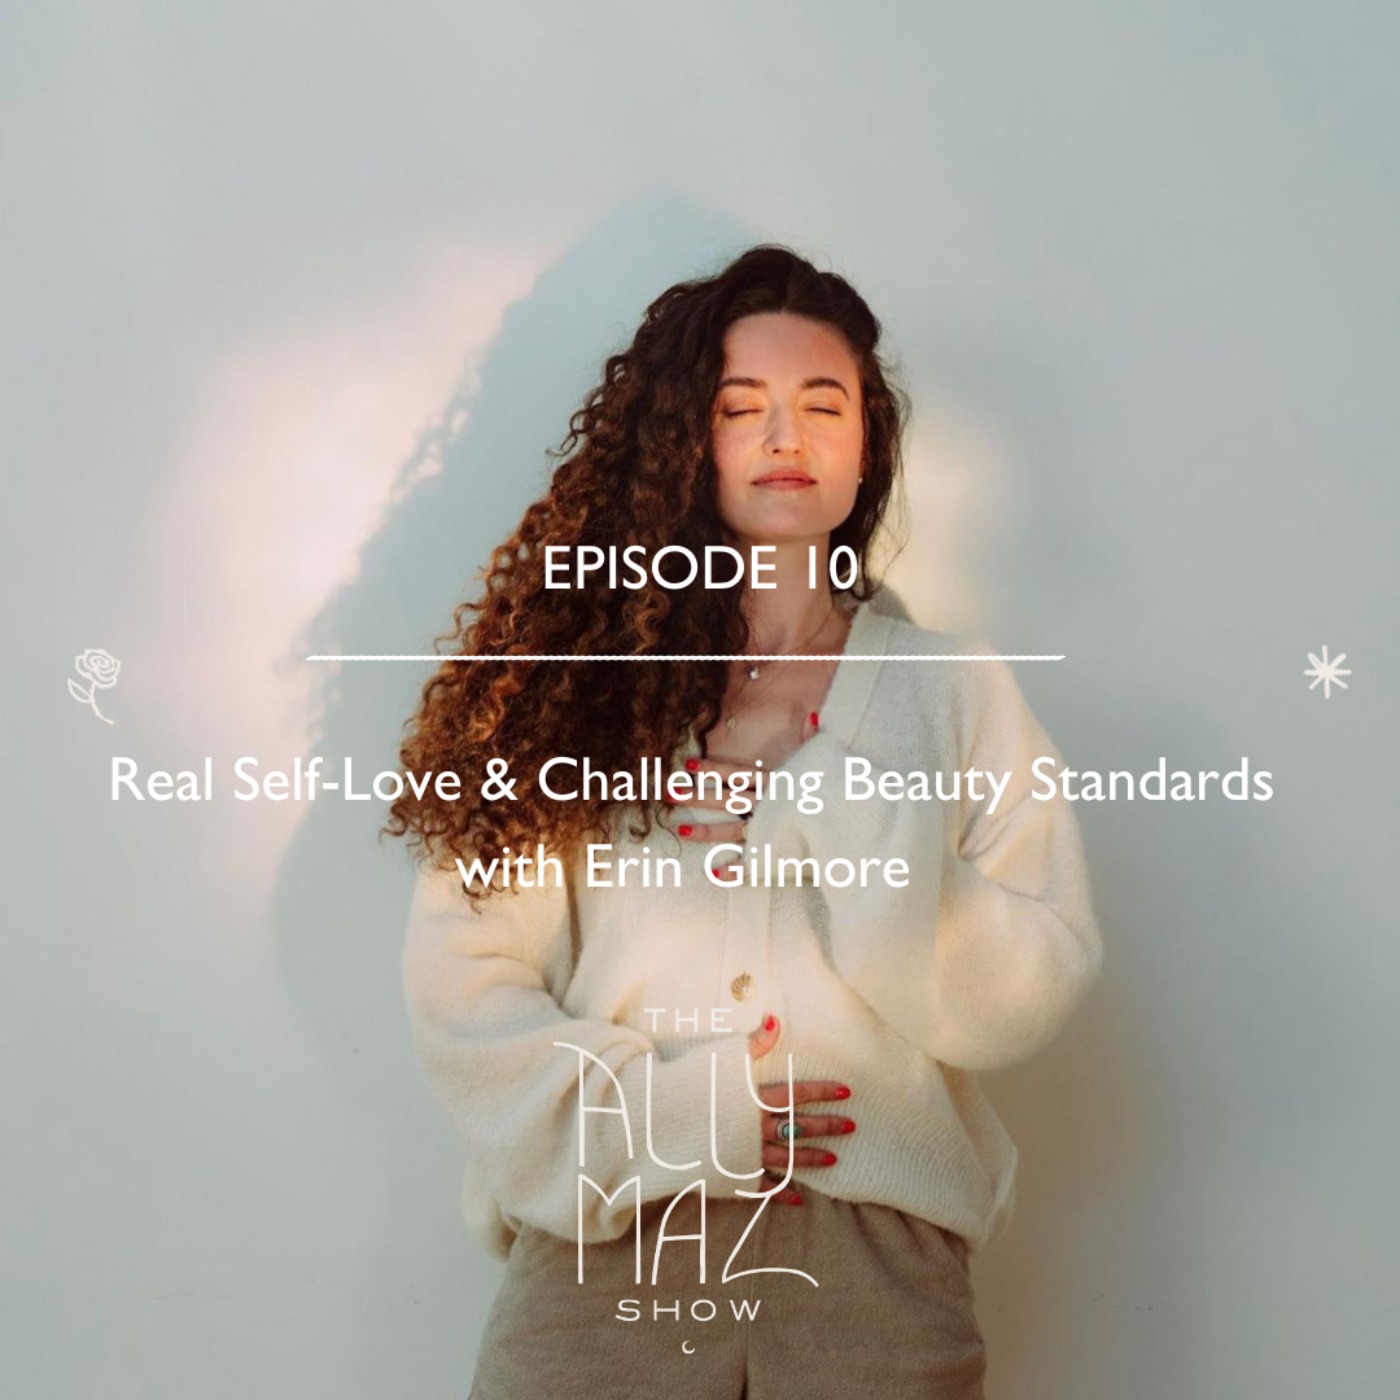 Real Self-Love & Challenging Beauty Standards with Erin Gilmore